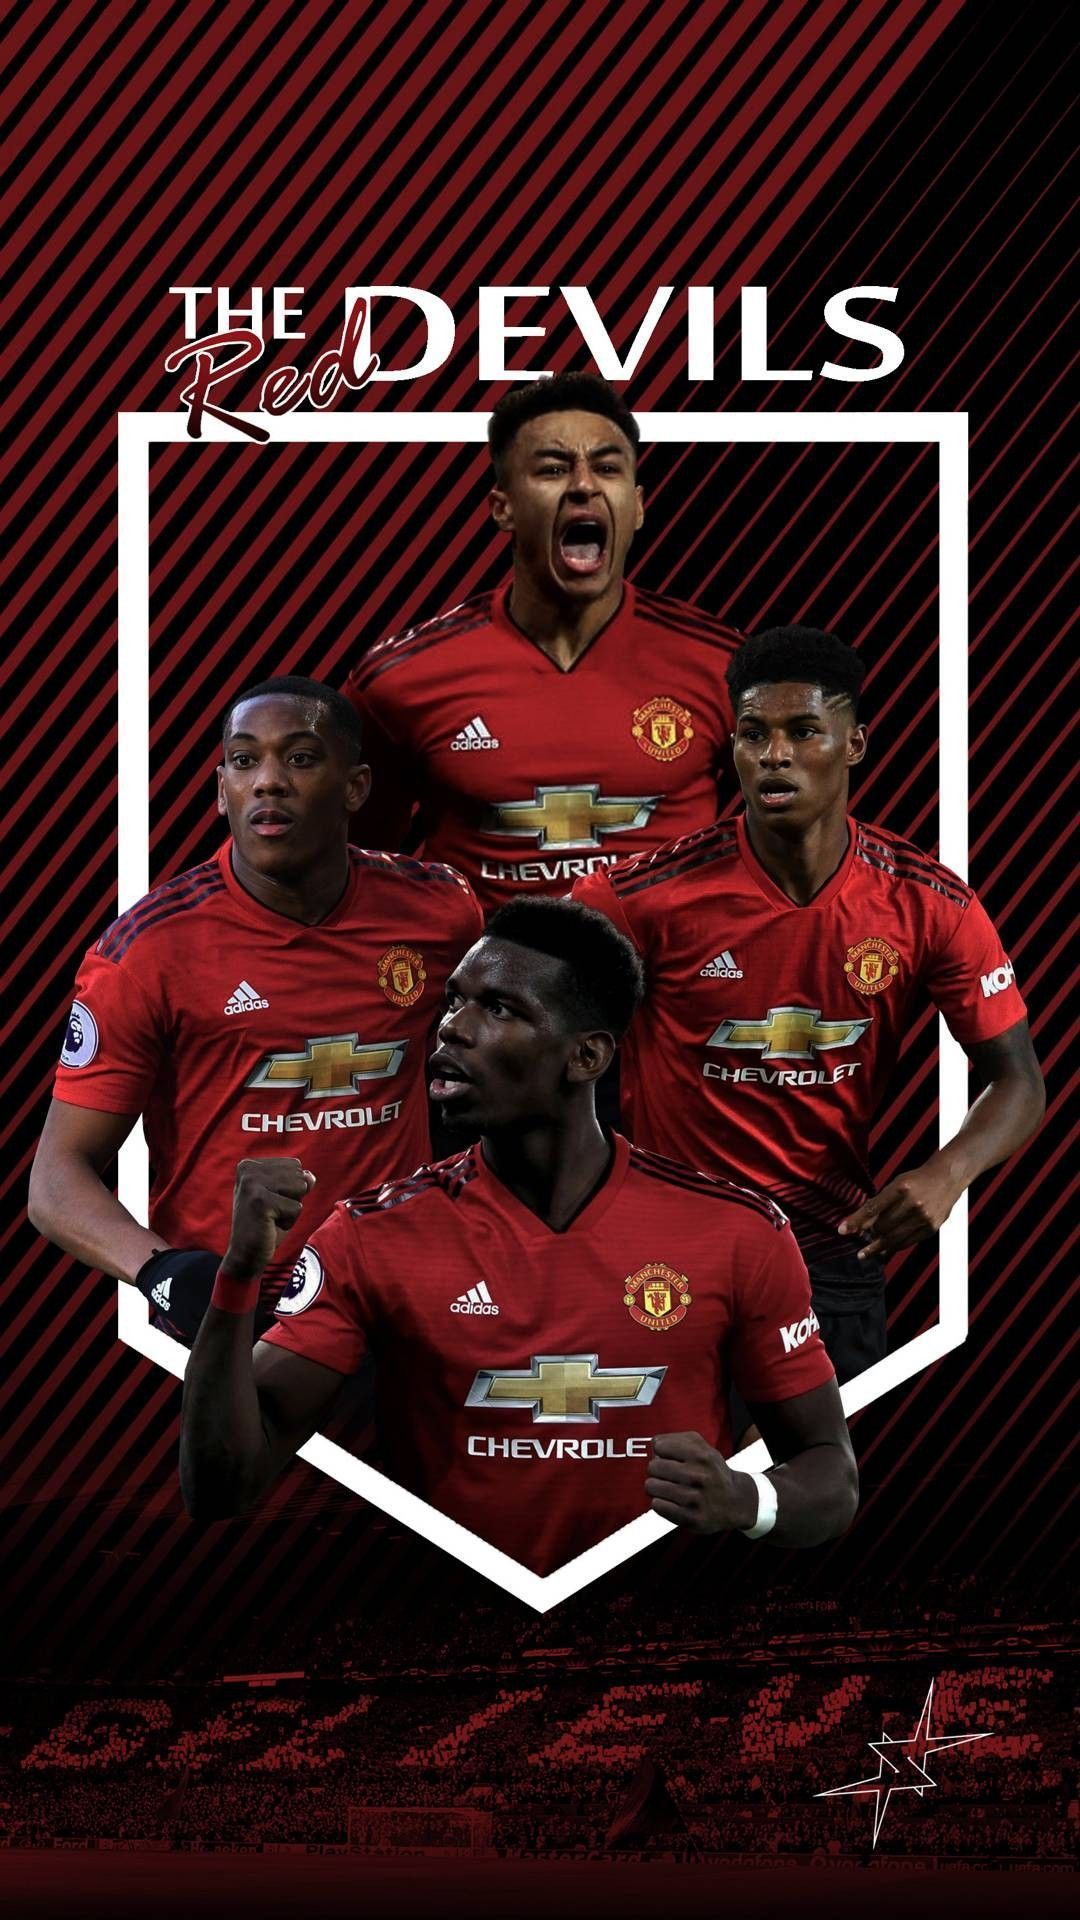 Manchester United 2020 Wallpaper Free Manchester United 2020 Background